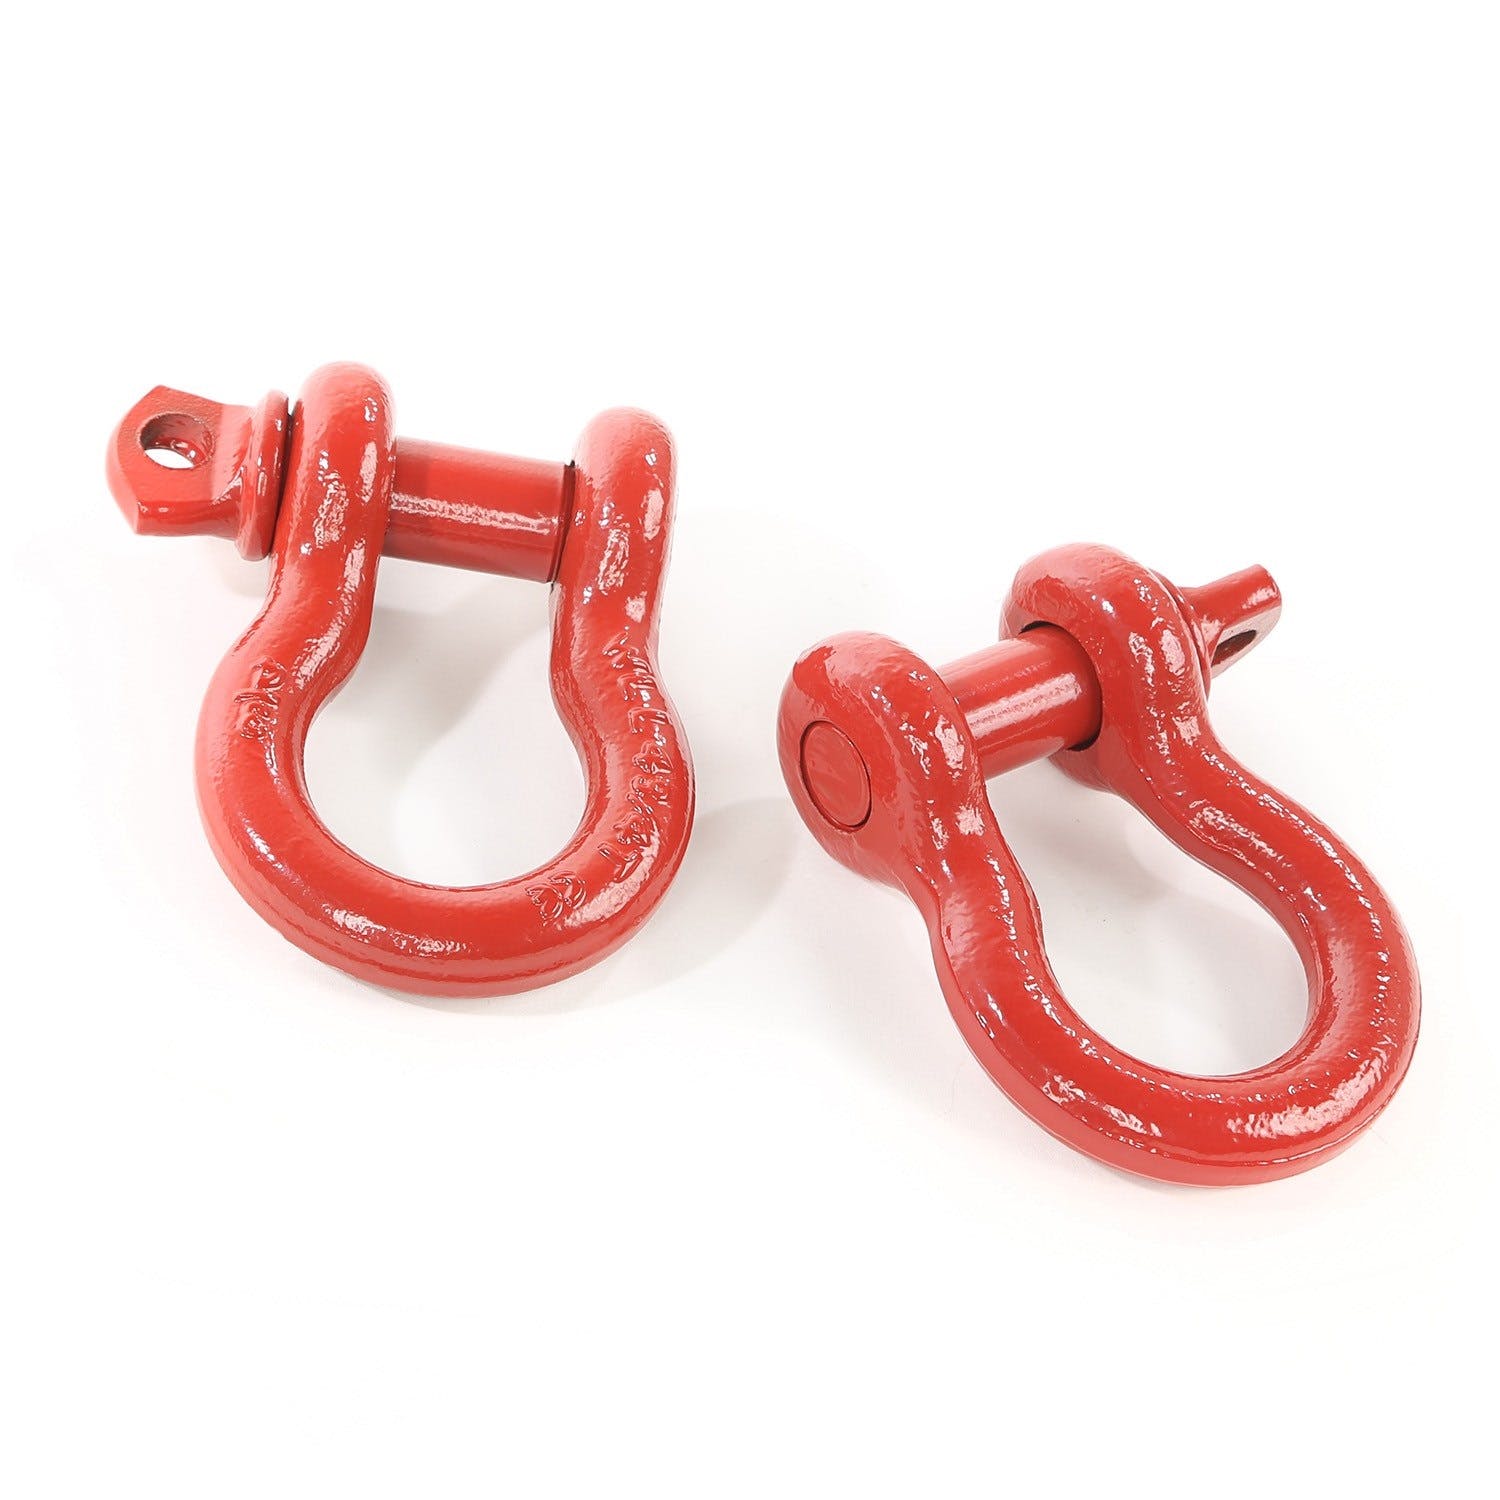 Rugged Ridge 11235.08 D-Ring Shackles; 3/4-Inch; Red; Steel; Pair